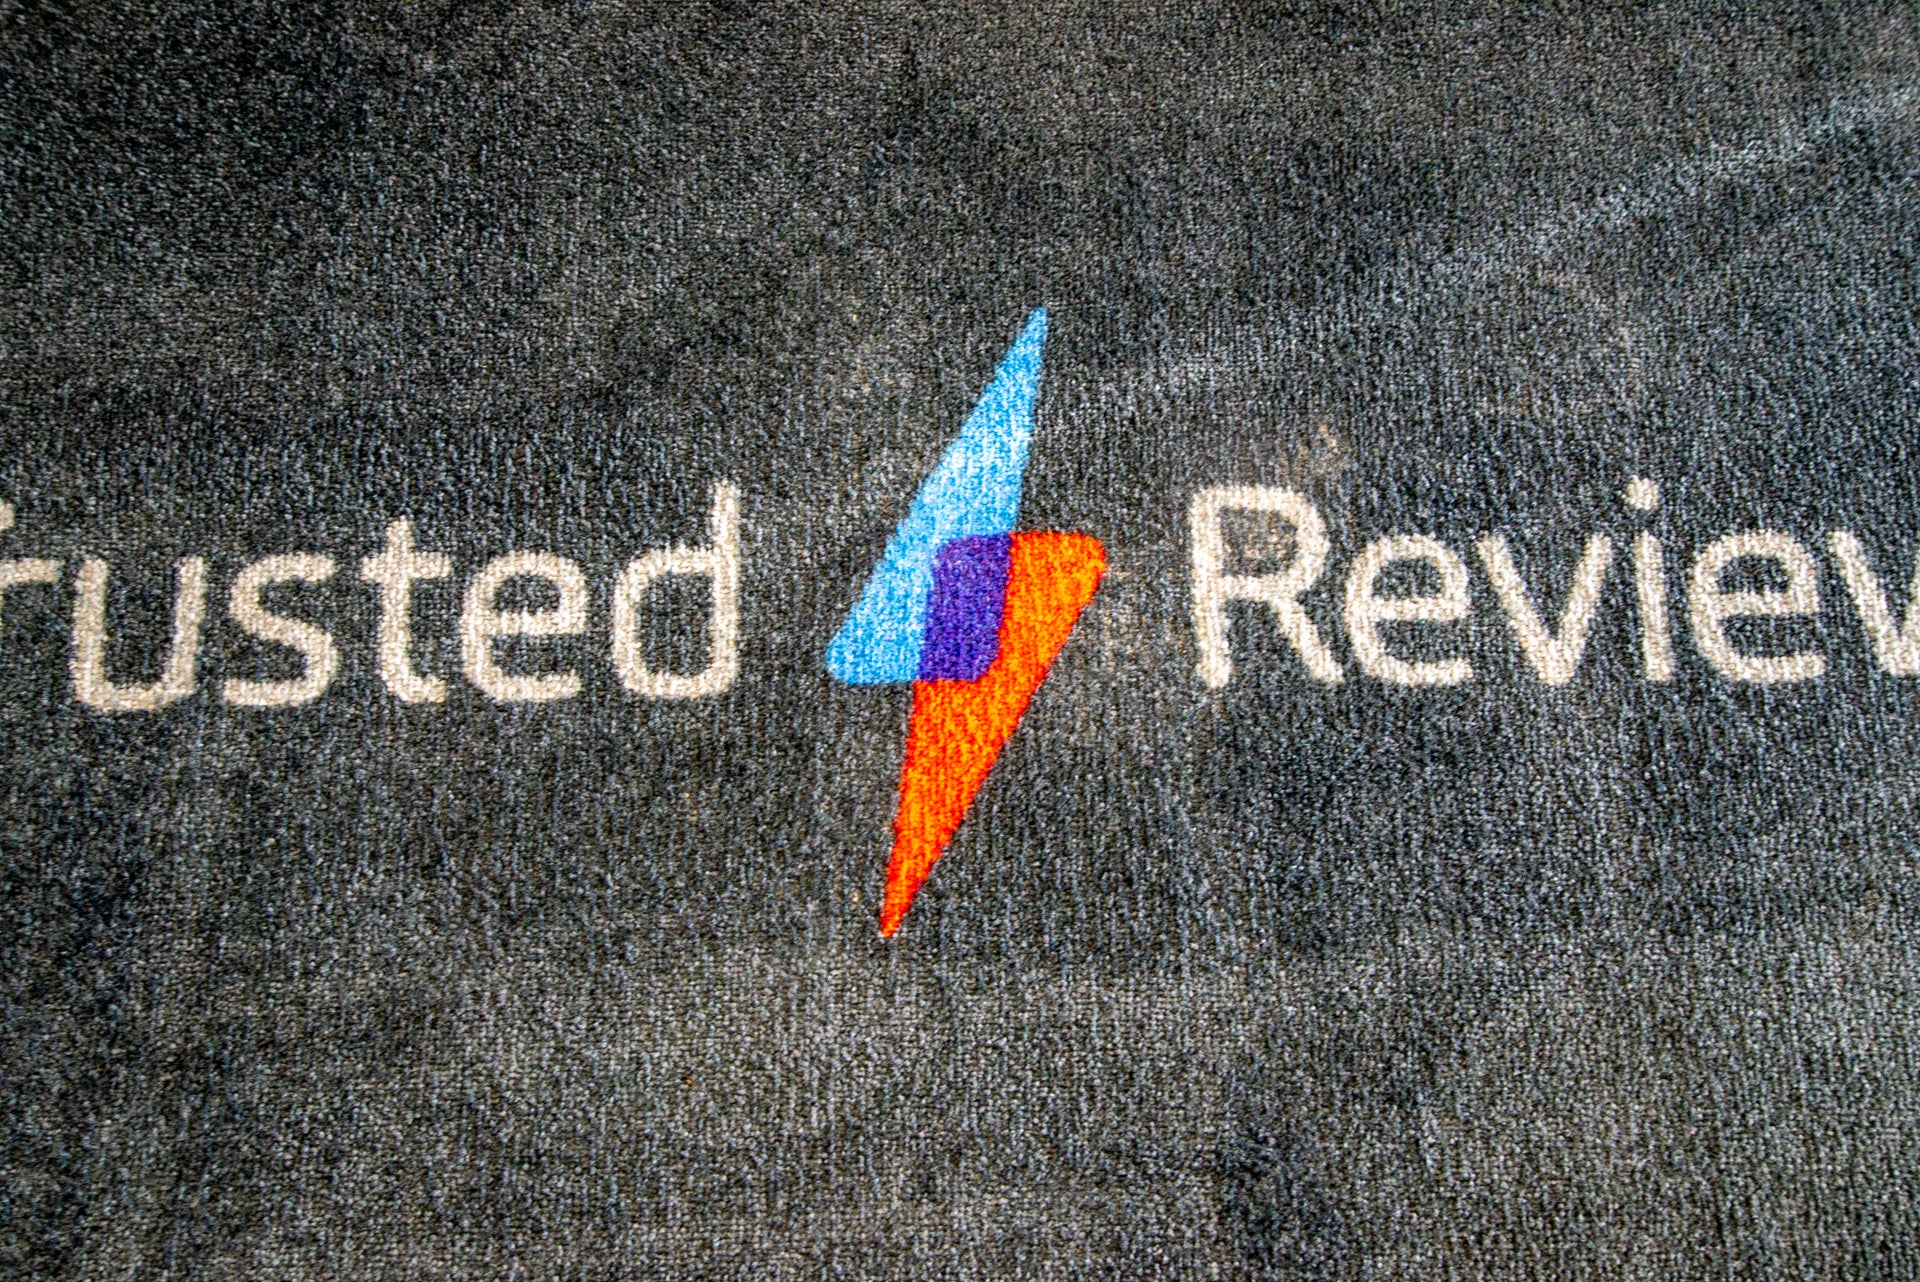 Trusted Reviews logo printed on a cloth